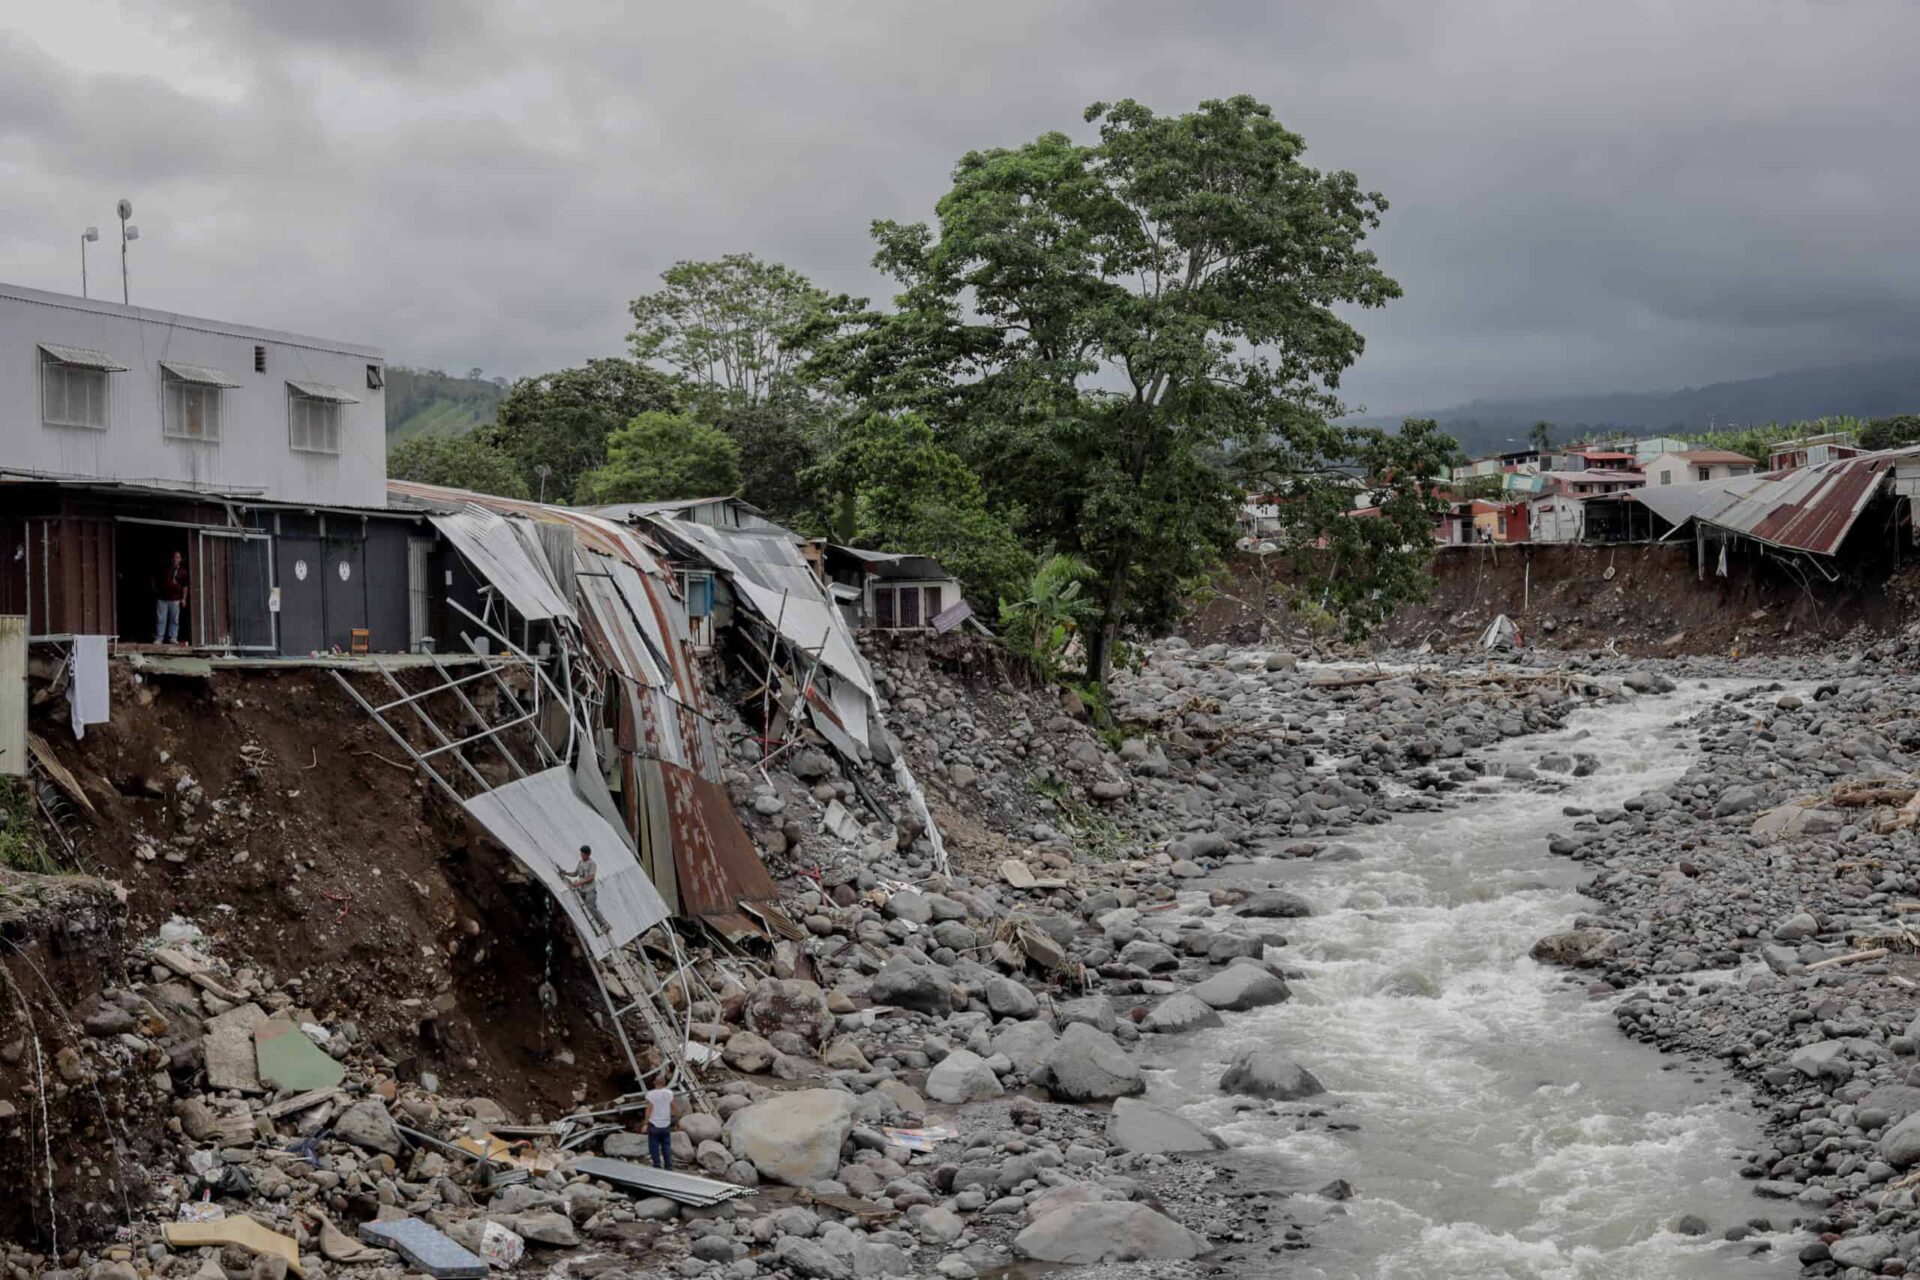 Updates on Costa Rica's flood recovery efforts